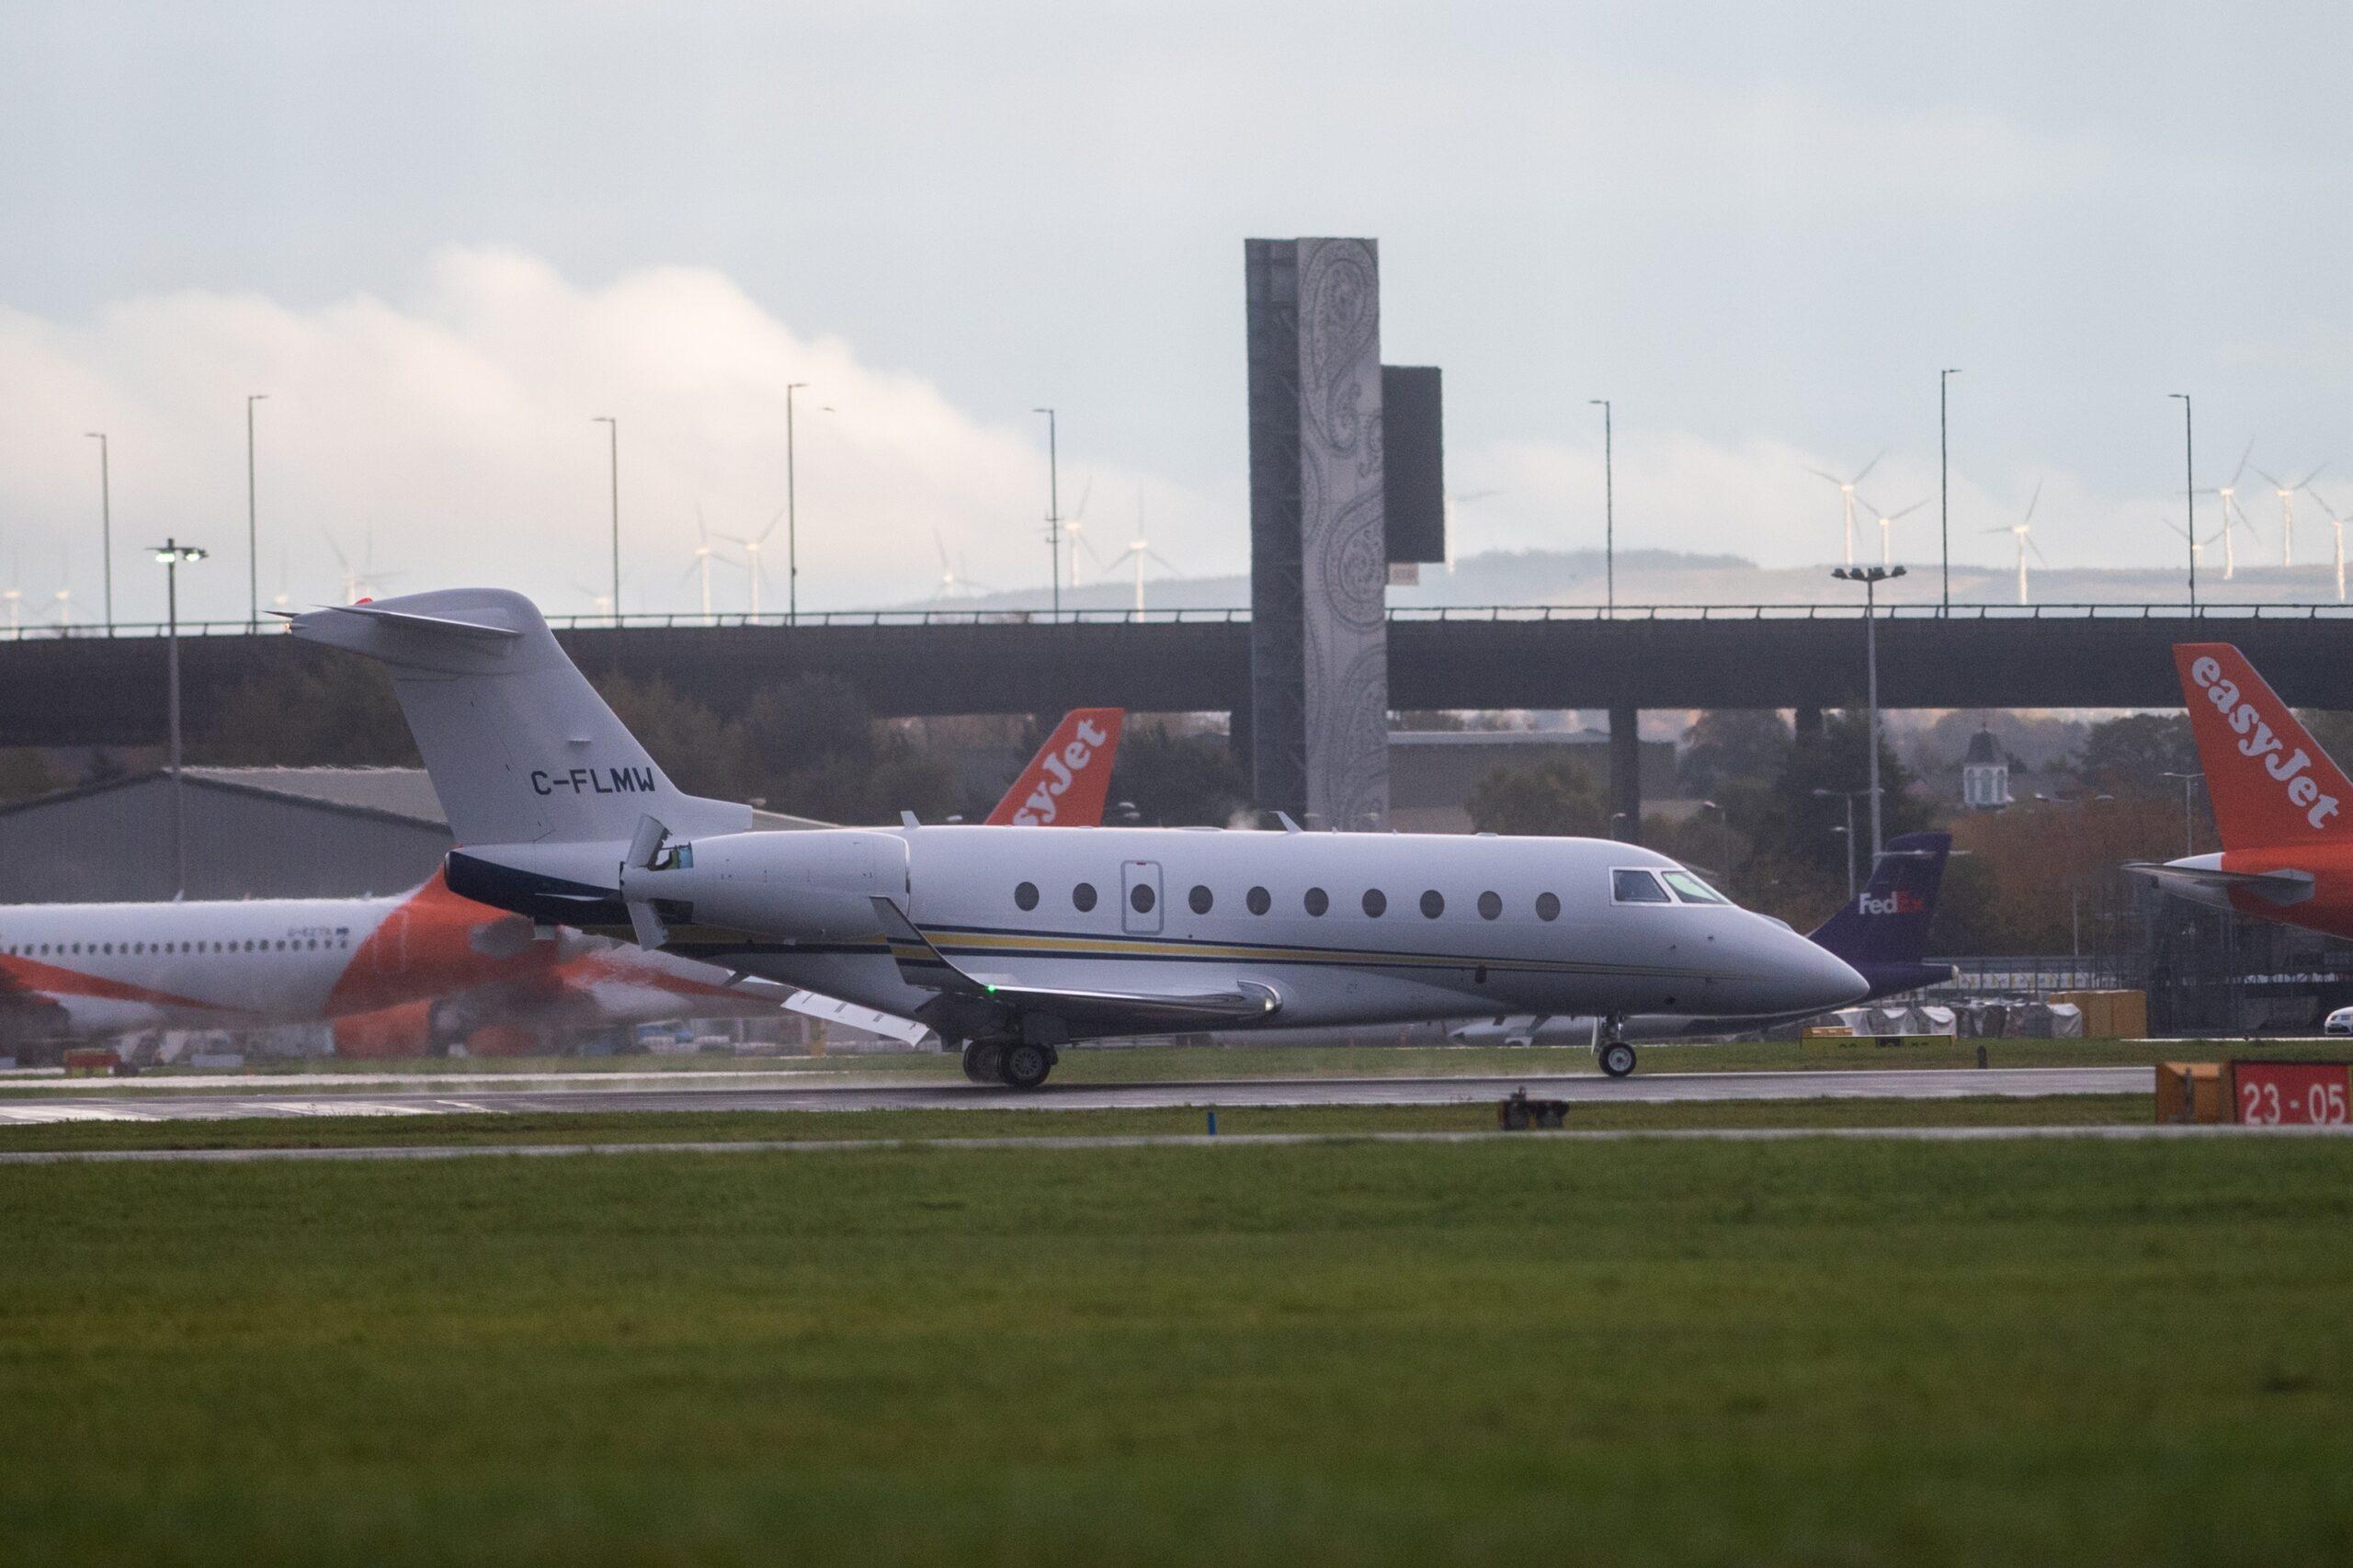 Amazon founder Jeff Bezos flew his private jet to Glasgow Prestwick airport Scotland for a United Nations summit aimed at cutting global greenhouse gas emissions